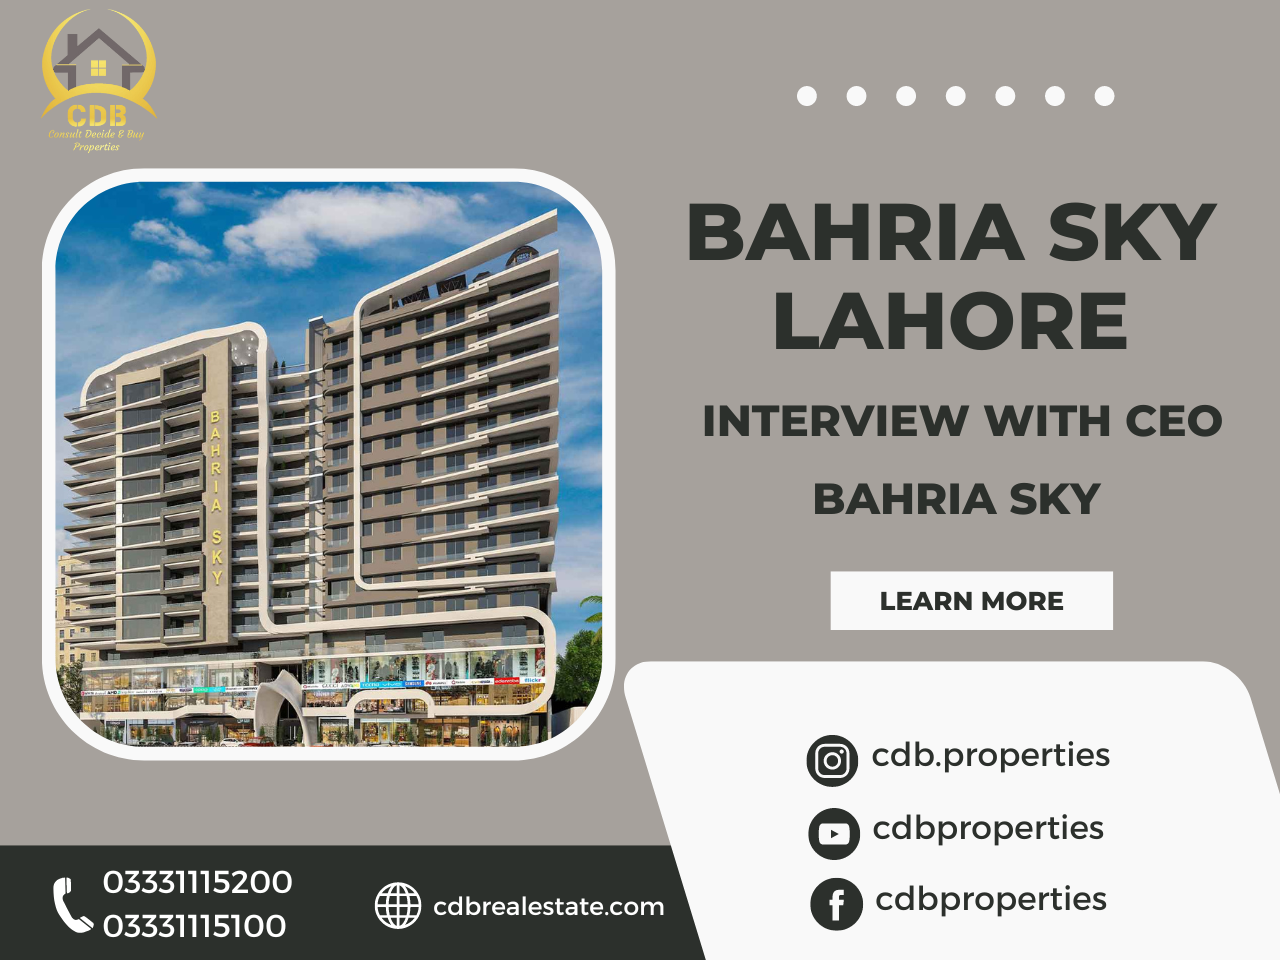 Bahria Sky Lahore - Interview With CEO Bahria Sky